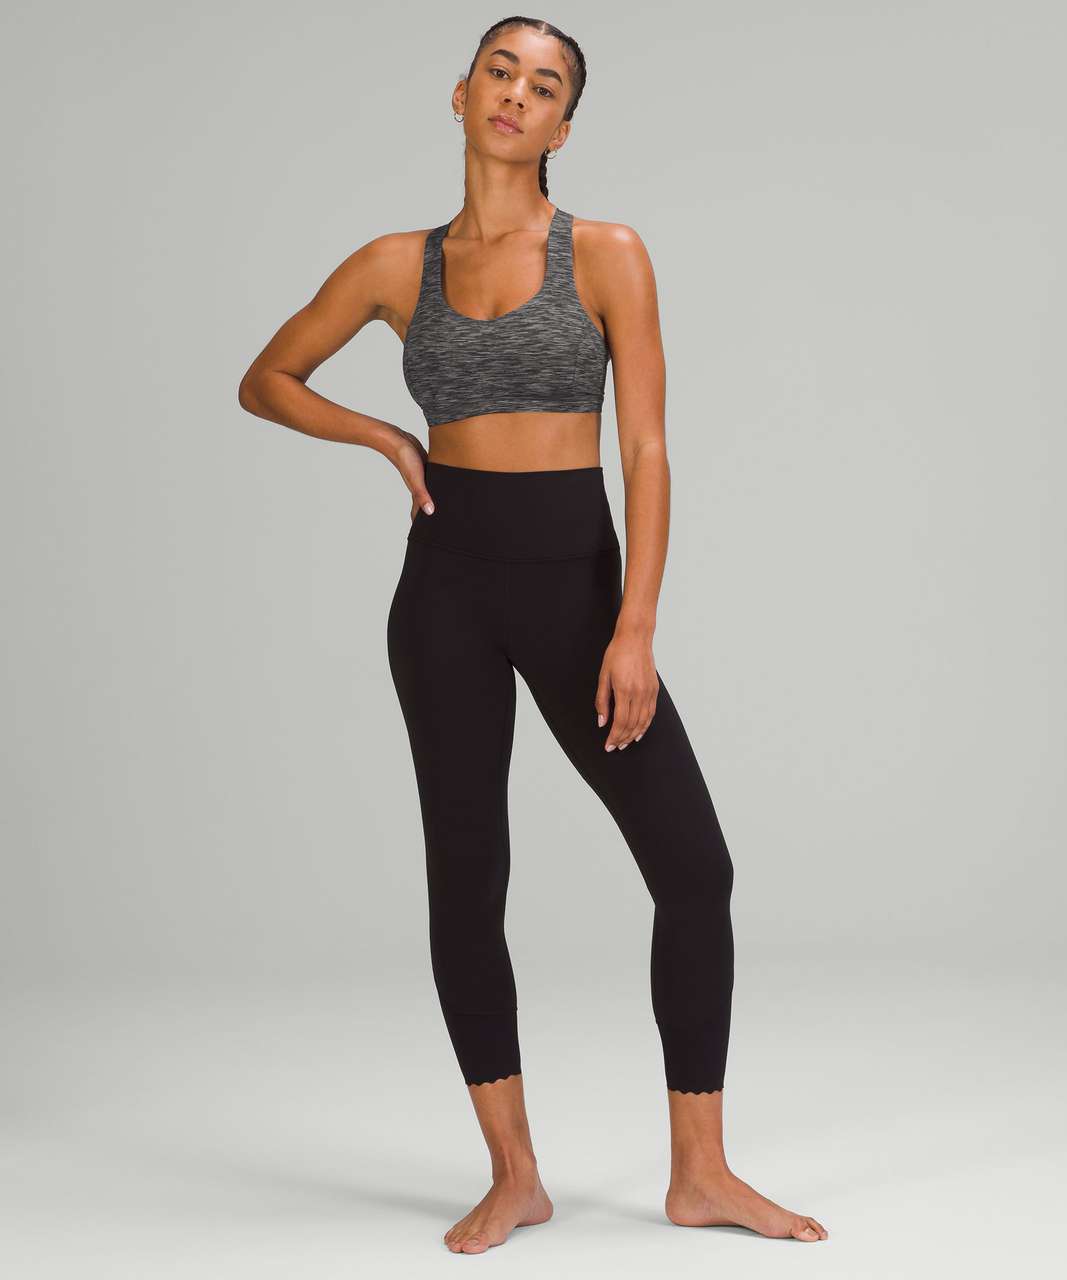 Lululemon Free to Be Serene Bra *Light Support, C/D Cup - Wee Are From Space Dark Carbon Ice Grey